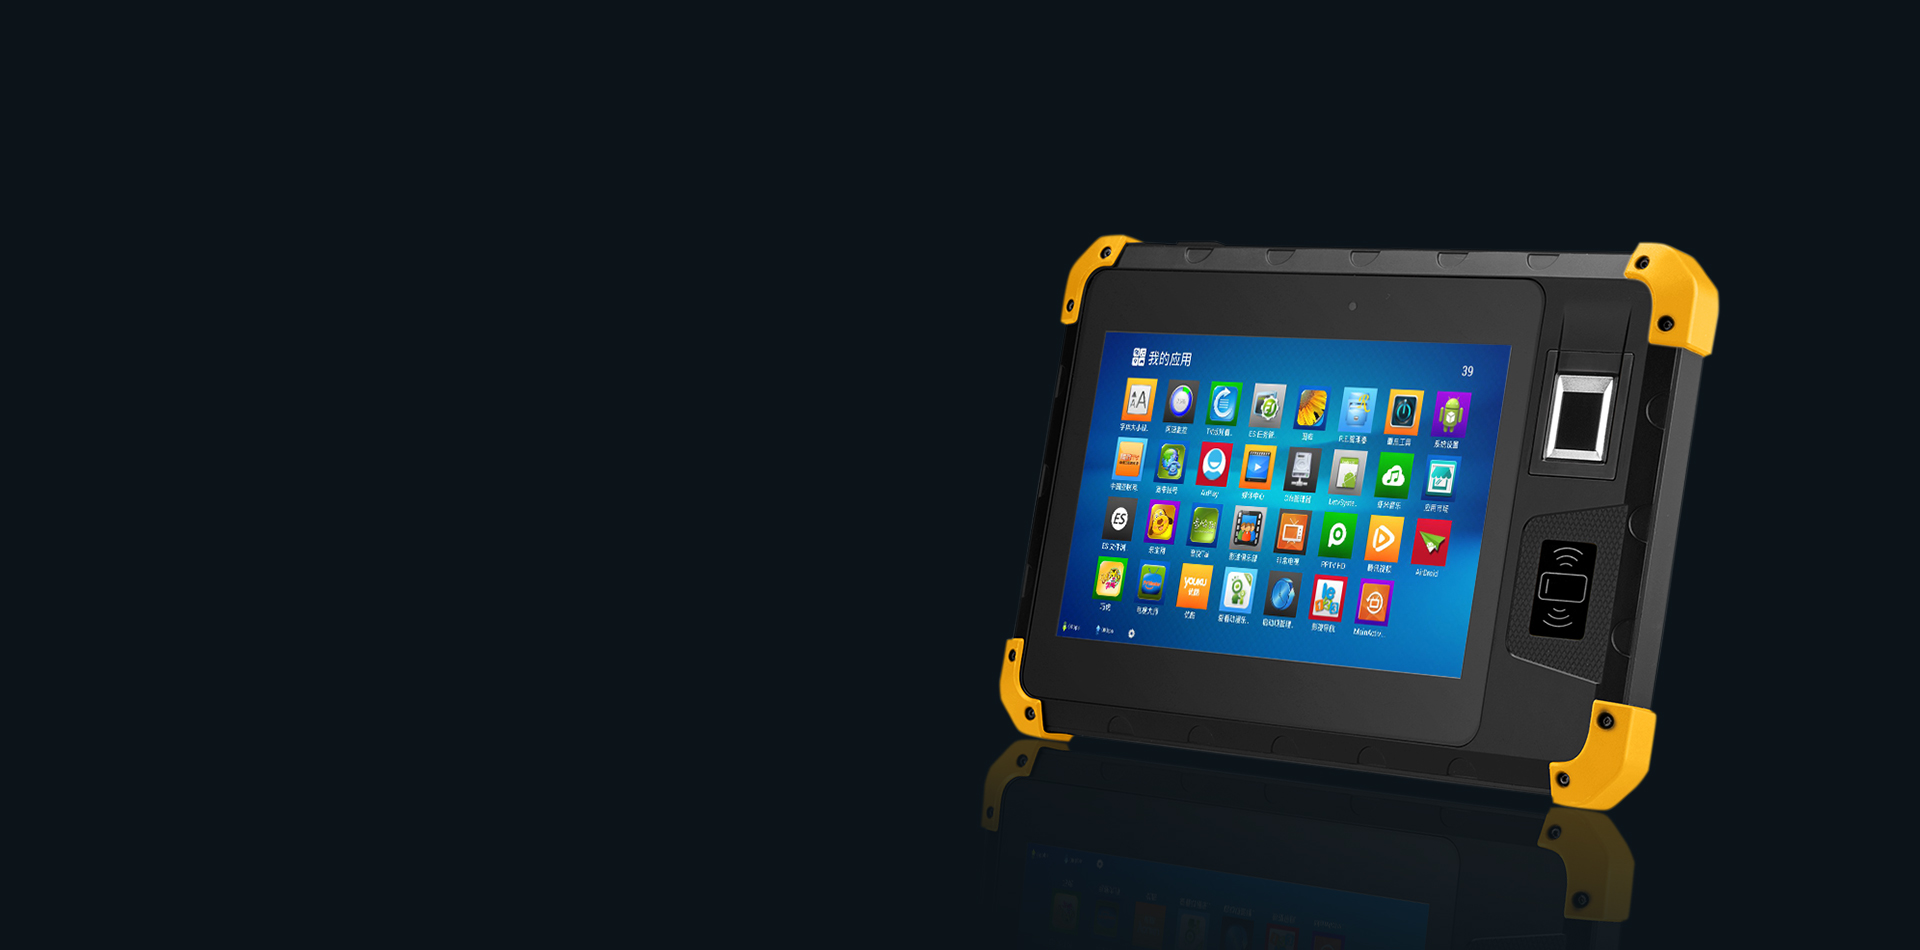 8 inch Rugged industrial<br />
Android tablet